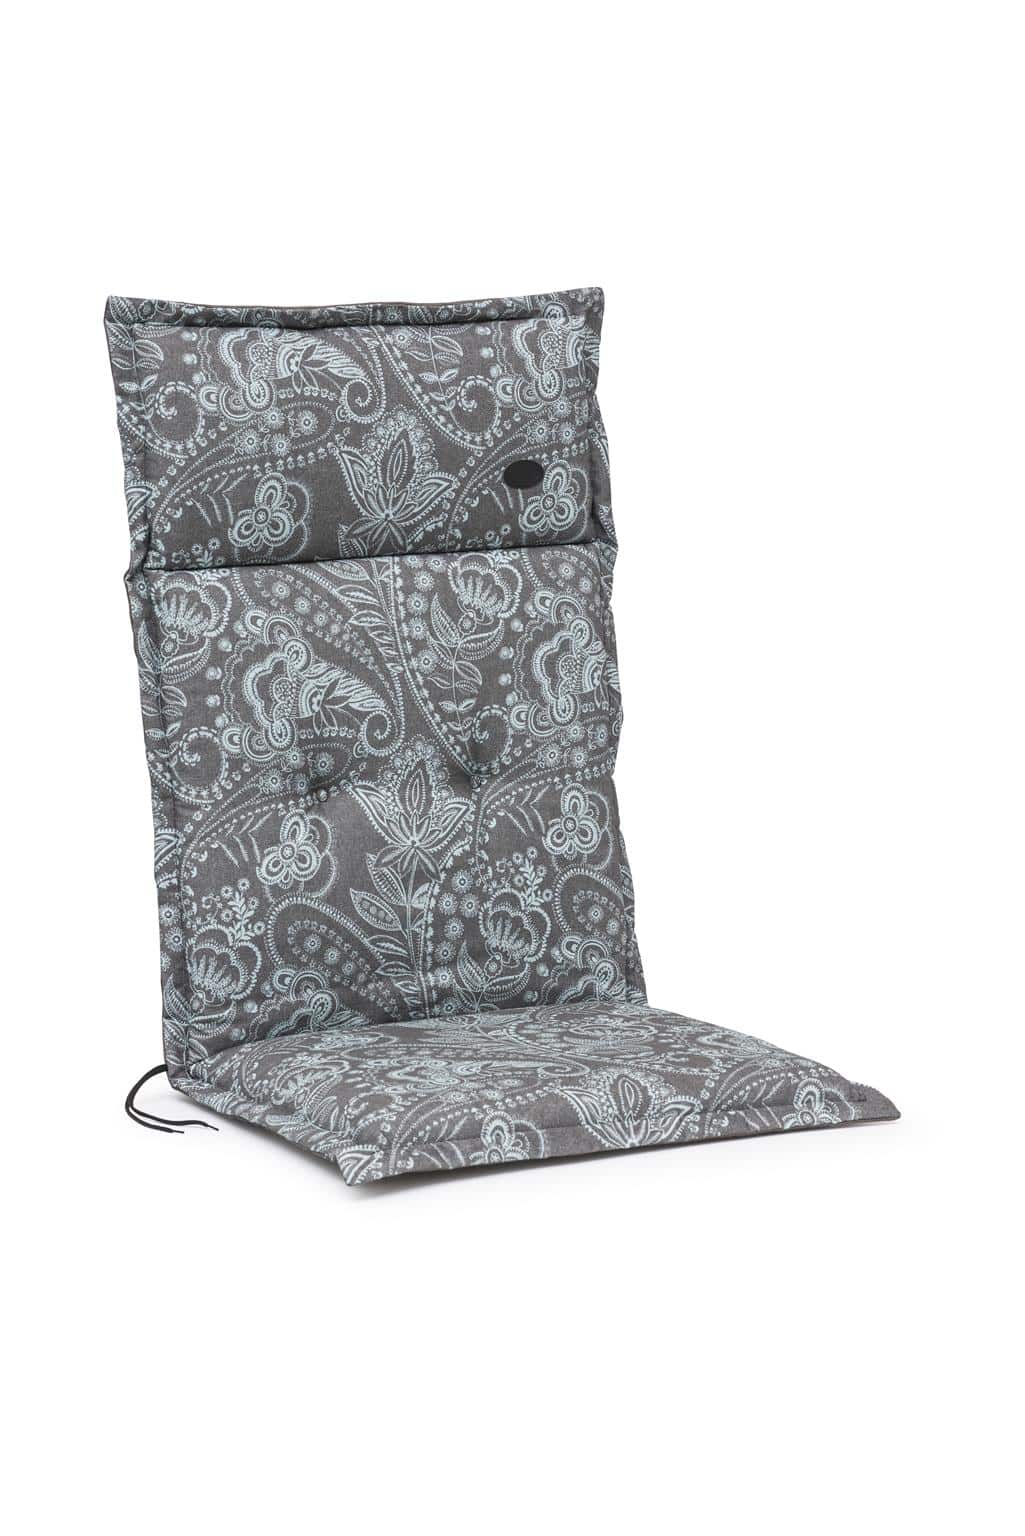 Hillerstorp Milano Dyna Hög 50x117x5 cm paisley turkos bomull.